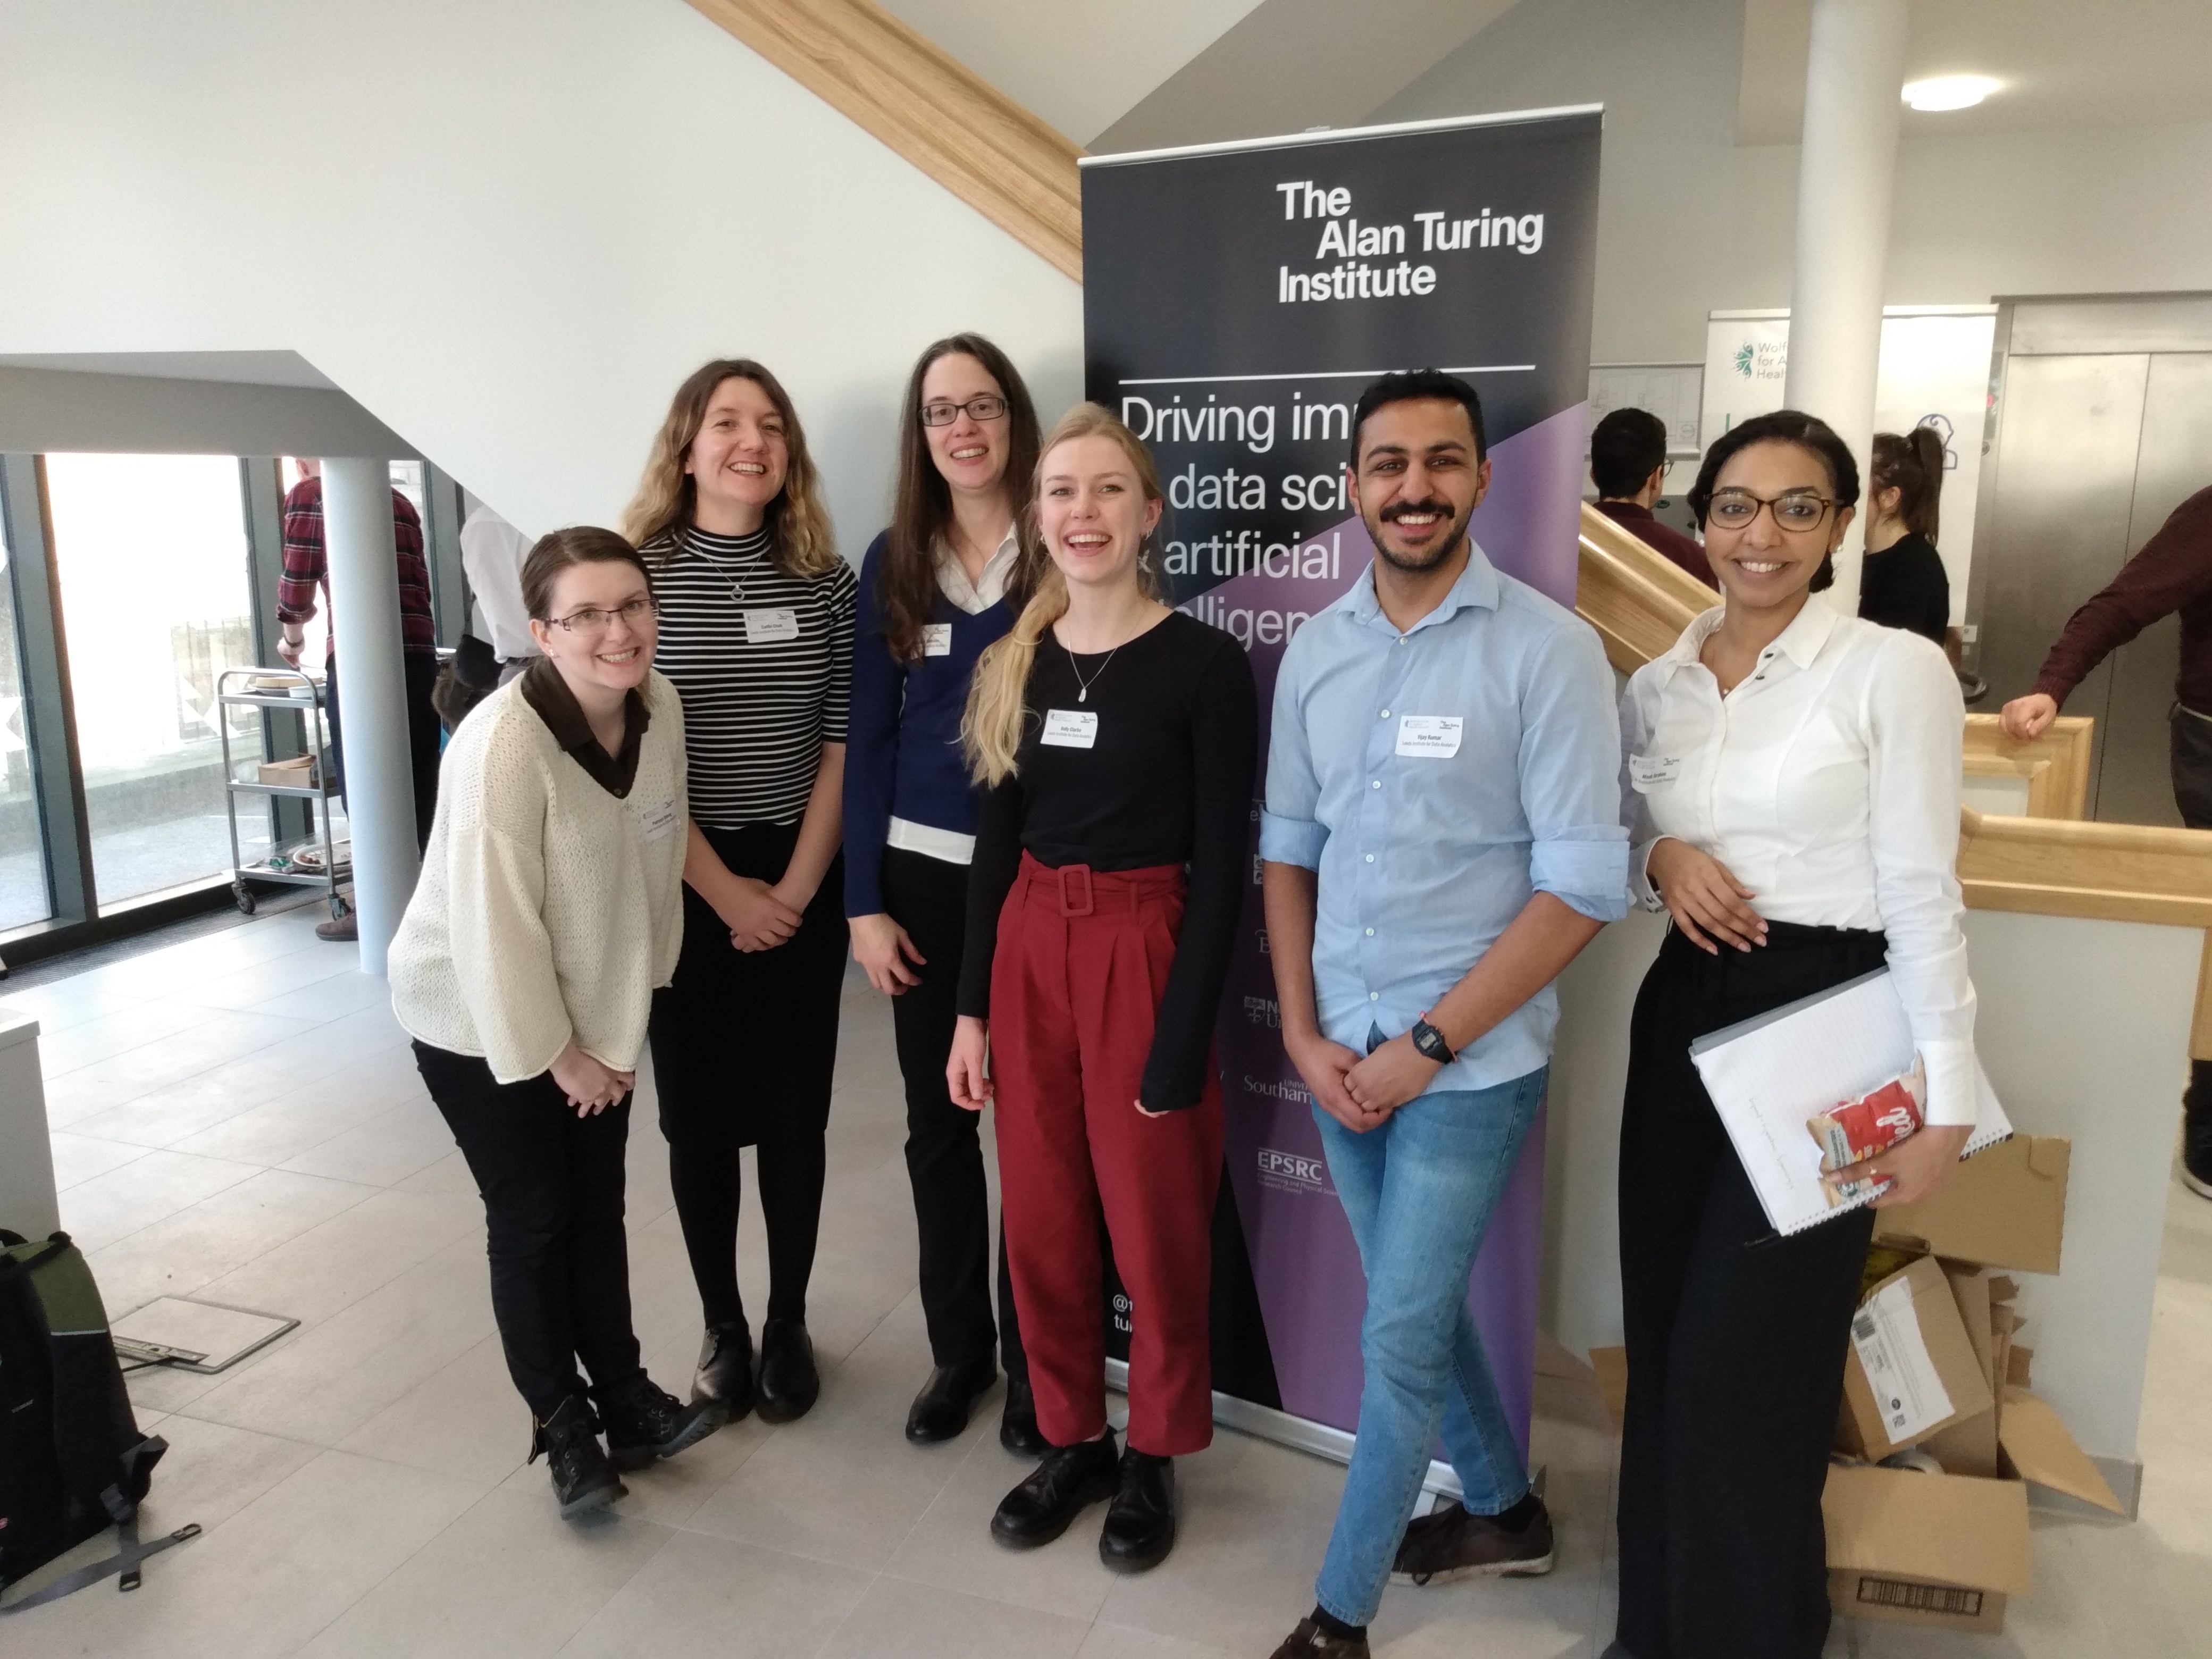 Holly and fellow LIDA interns, attending the Improving Lives Through Place-Based Urban Analytics event in Bradford.